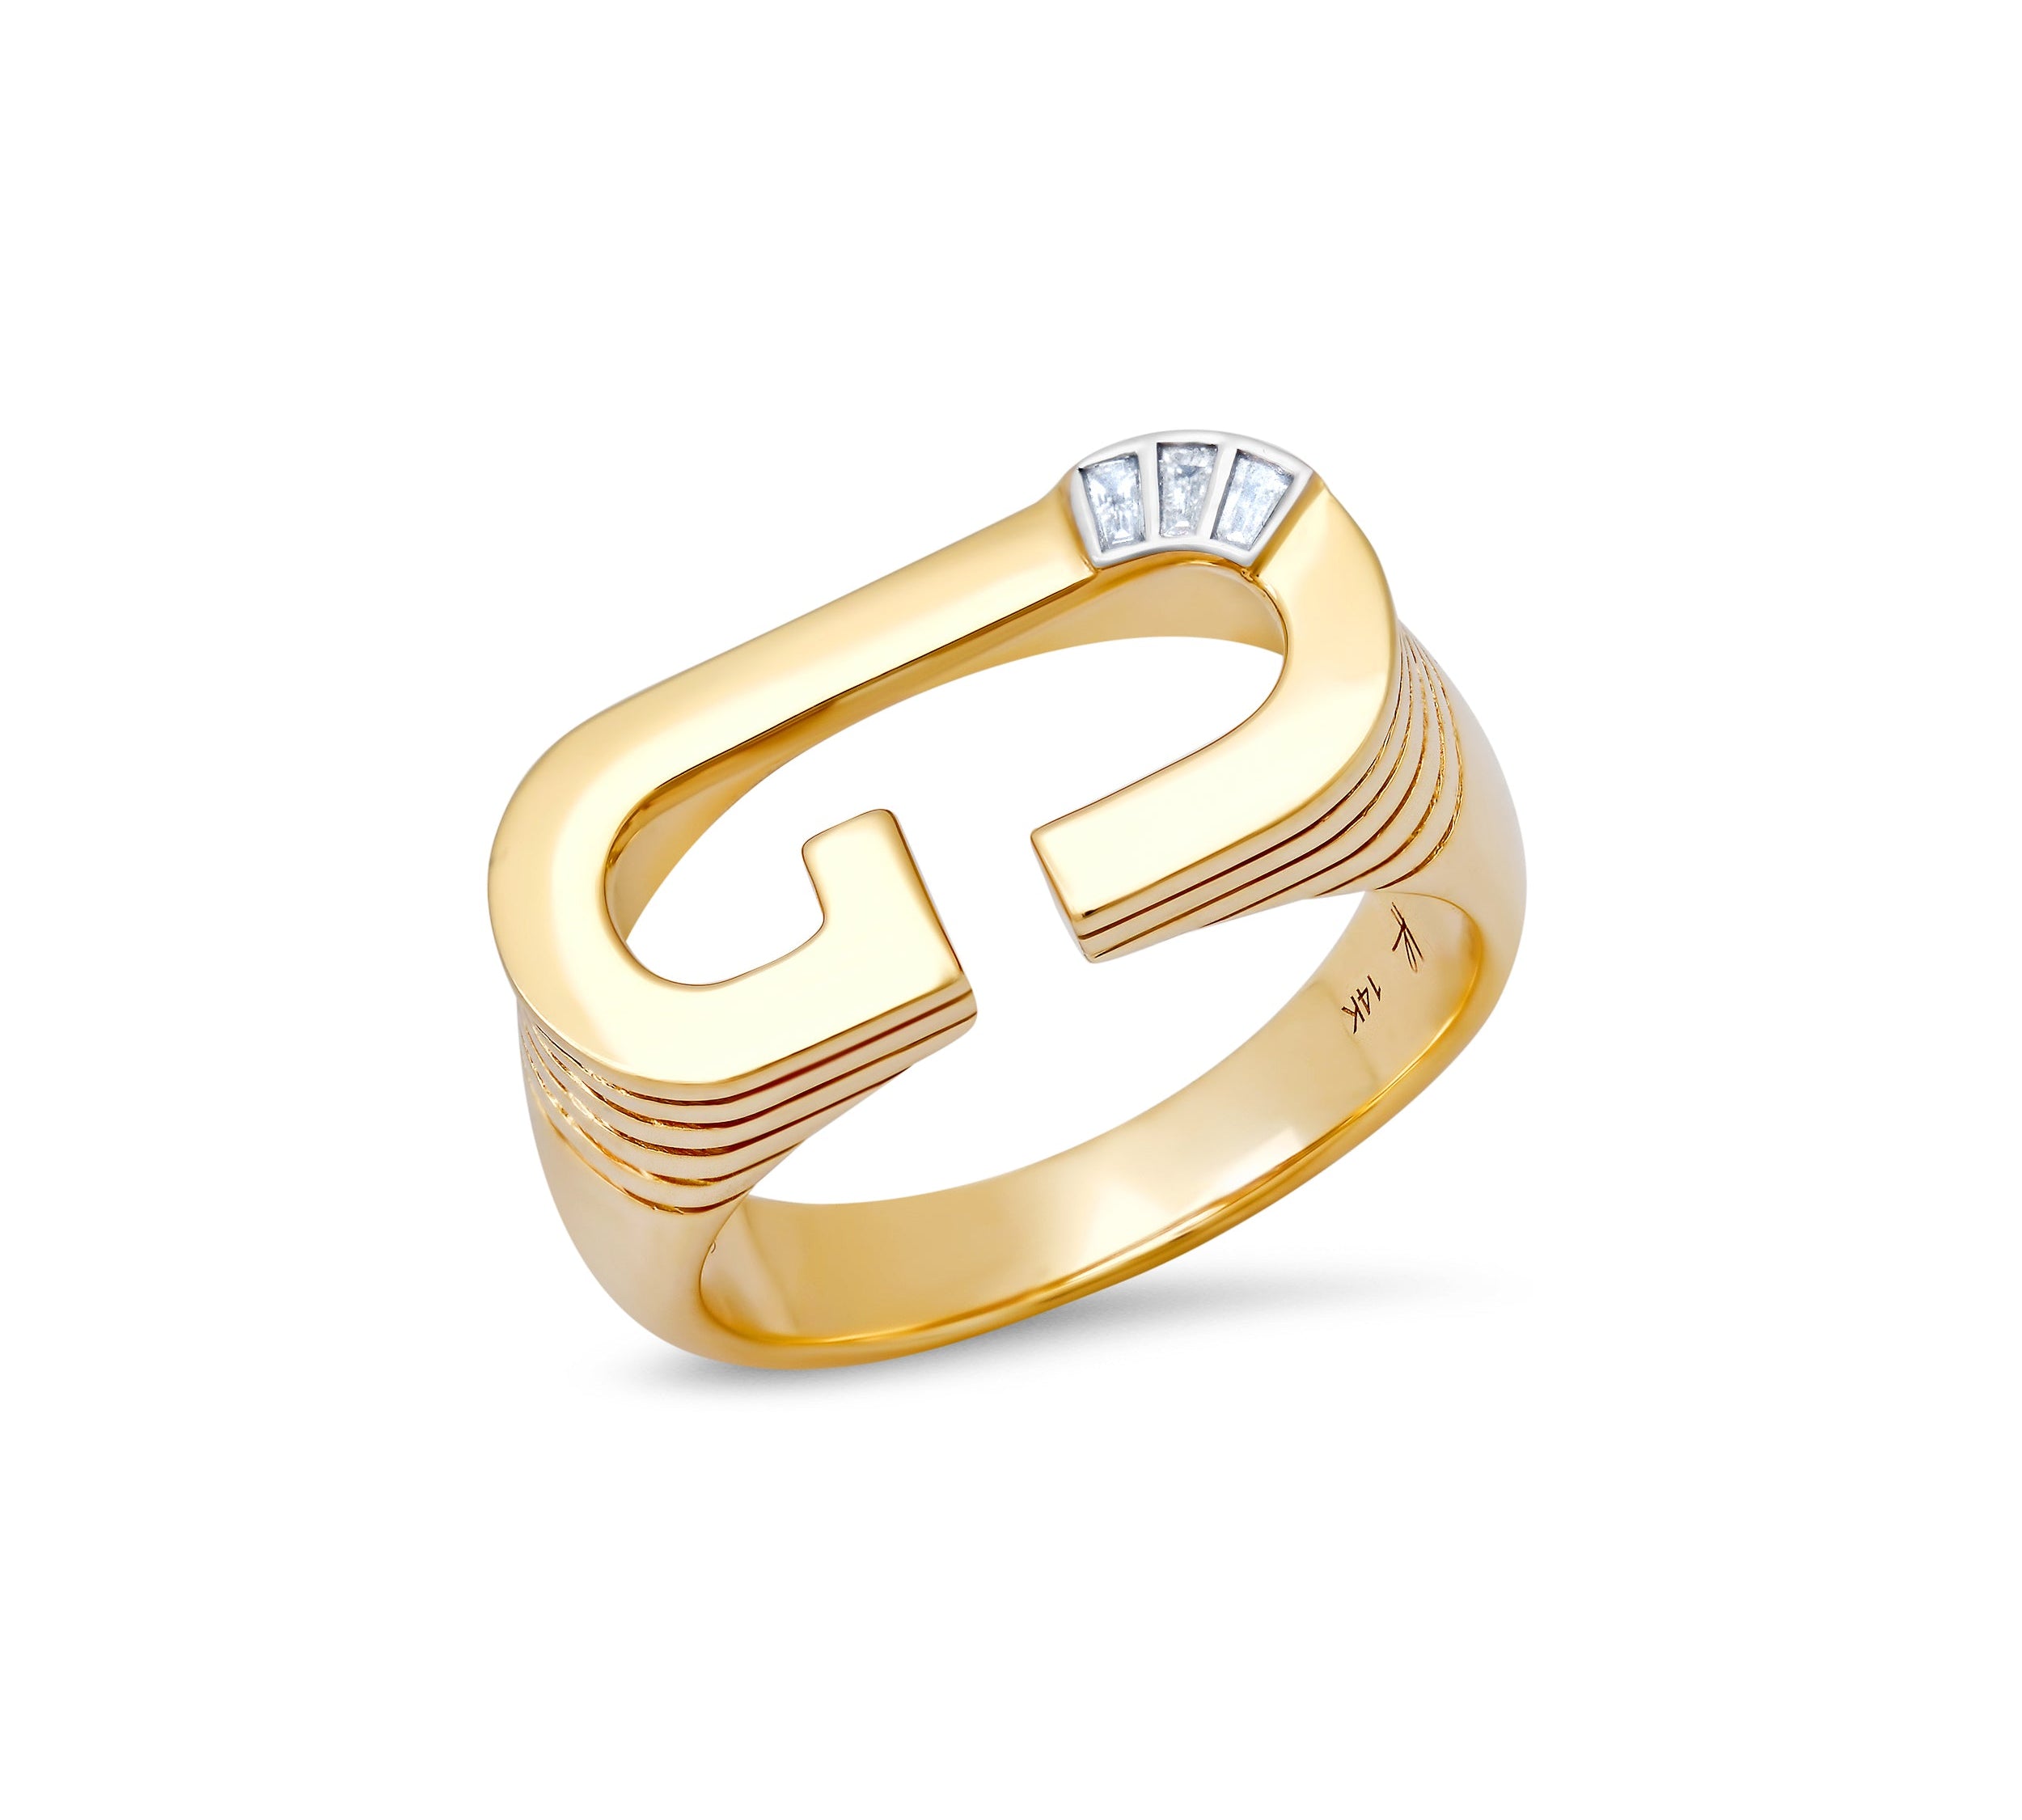 Grandsize Initial 3-Baguette Ring Ring Helena Rose Jewelry 6 G 